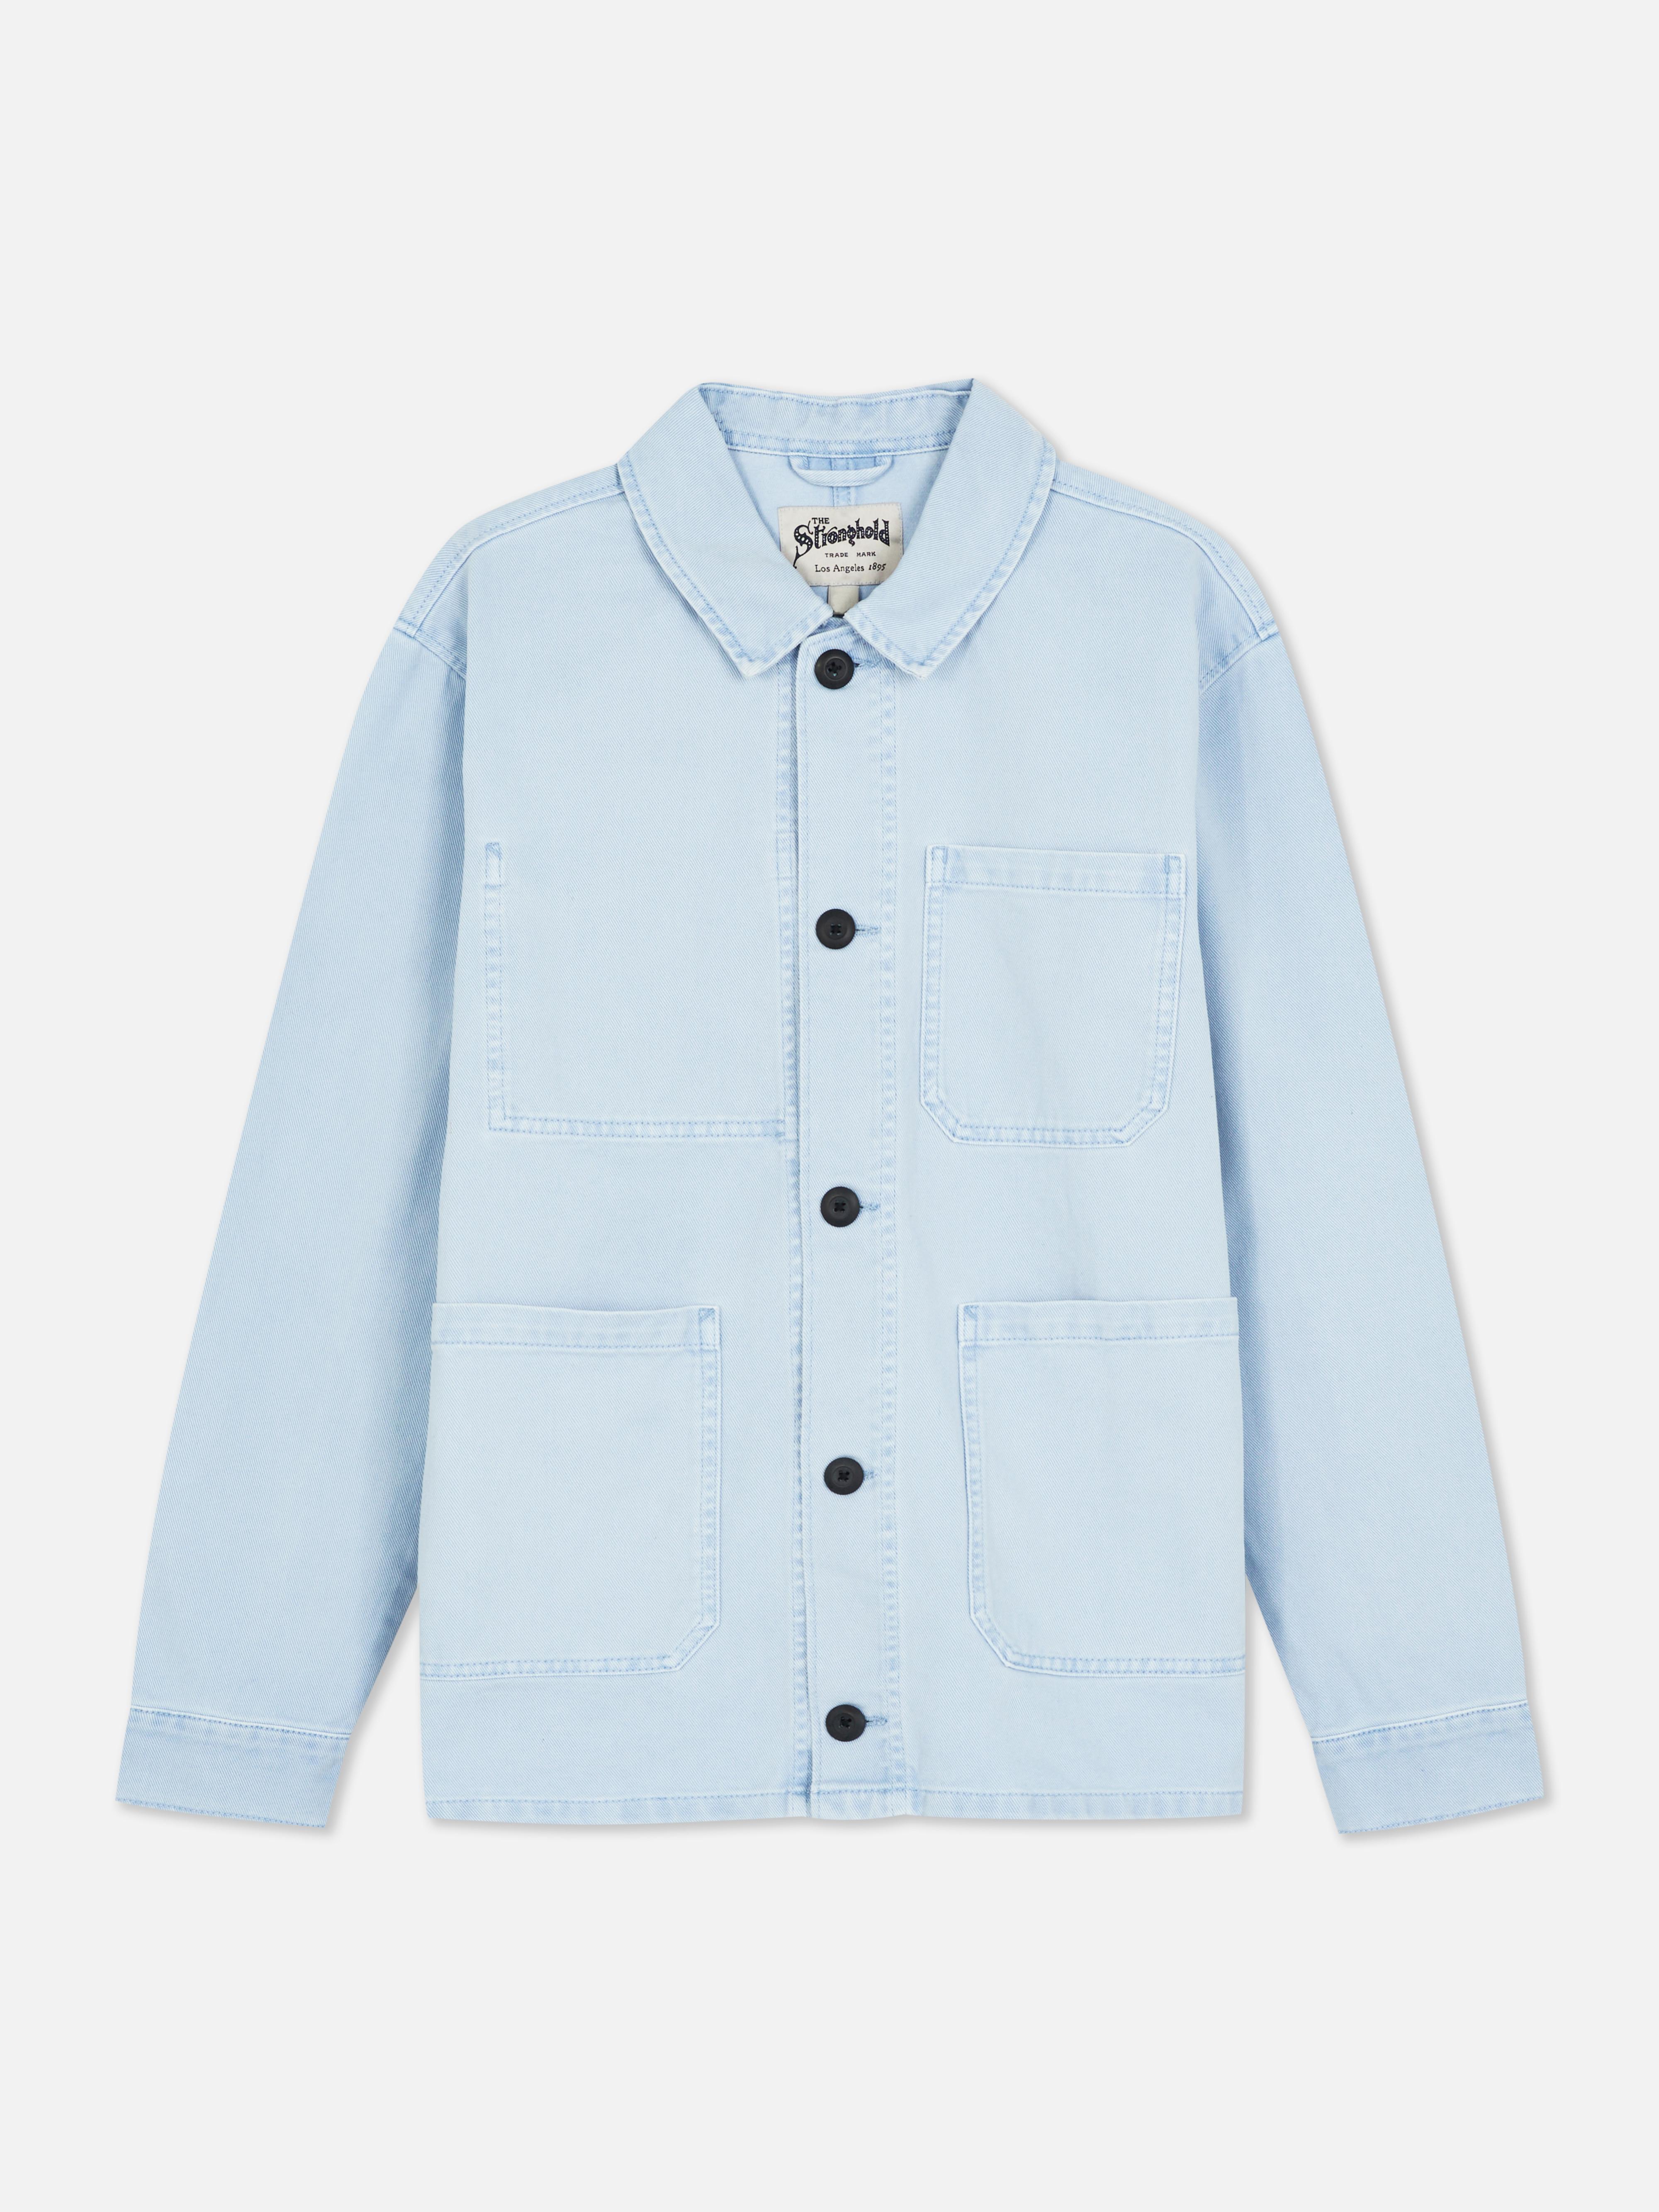 The Stronghold Washed Overshirt